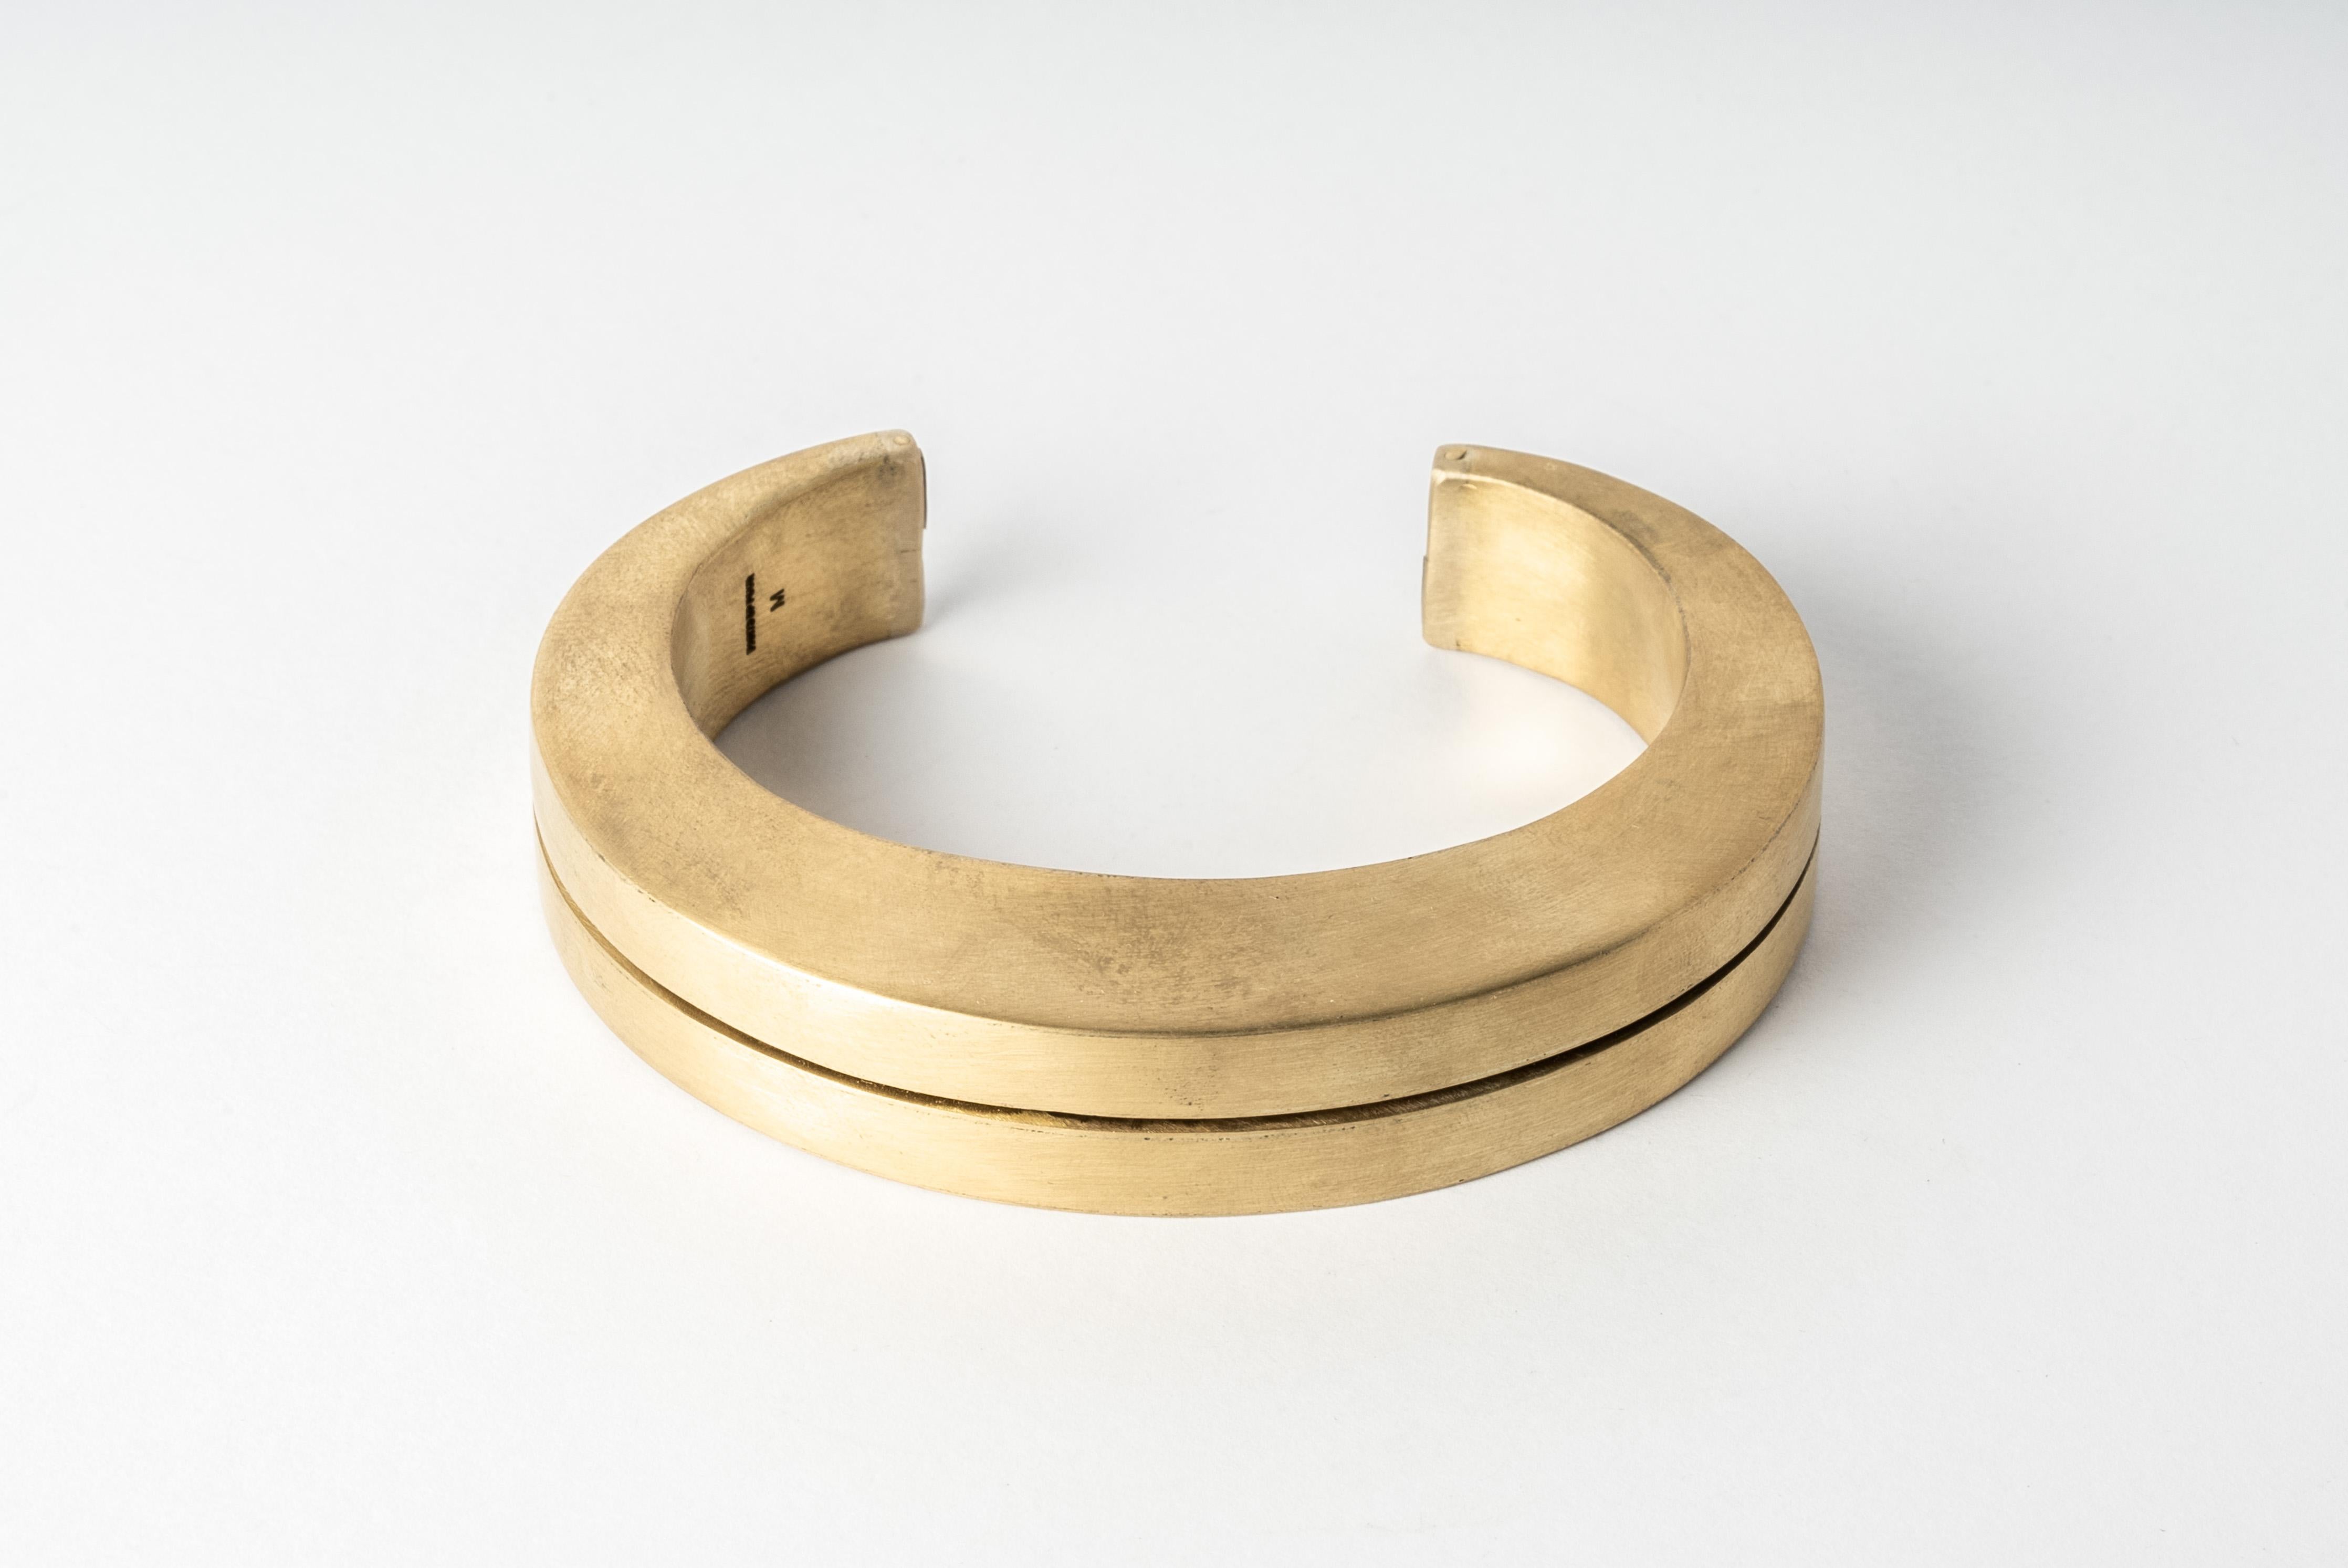 Crescent Crevice Bracelet v2 (15mm, MR) In New Condition For Sale In Hong Kong, Hong Kong Island